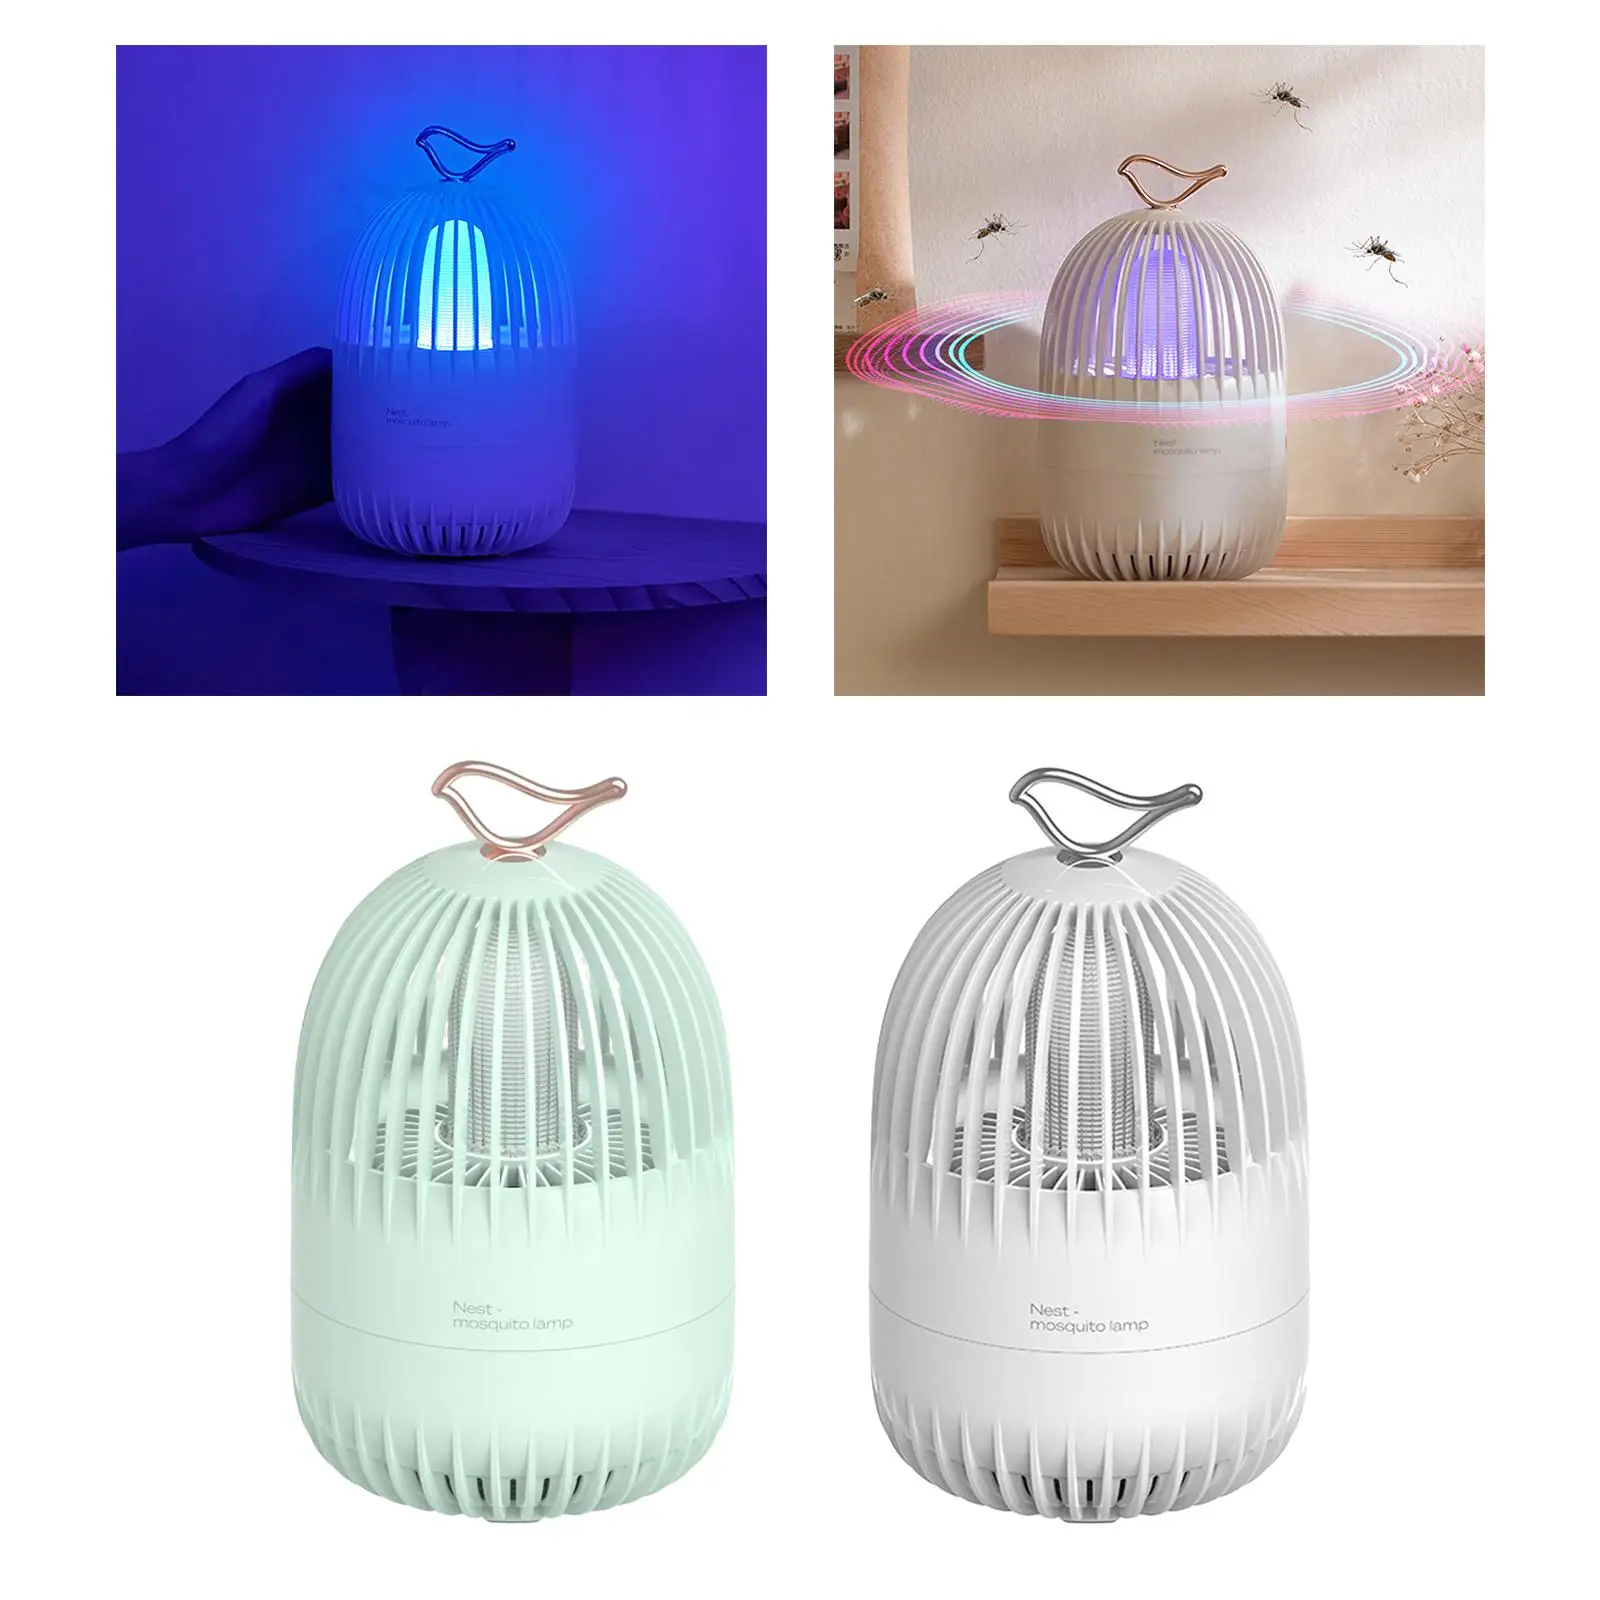 Portable Insect Trap Zapper USB Attractant Rotary Plastic Killer Lamp Detachable Fly Trap for Outdoor Indoor Patio Garden Lawn